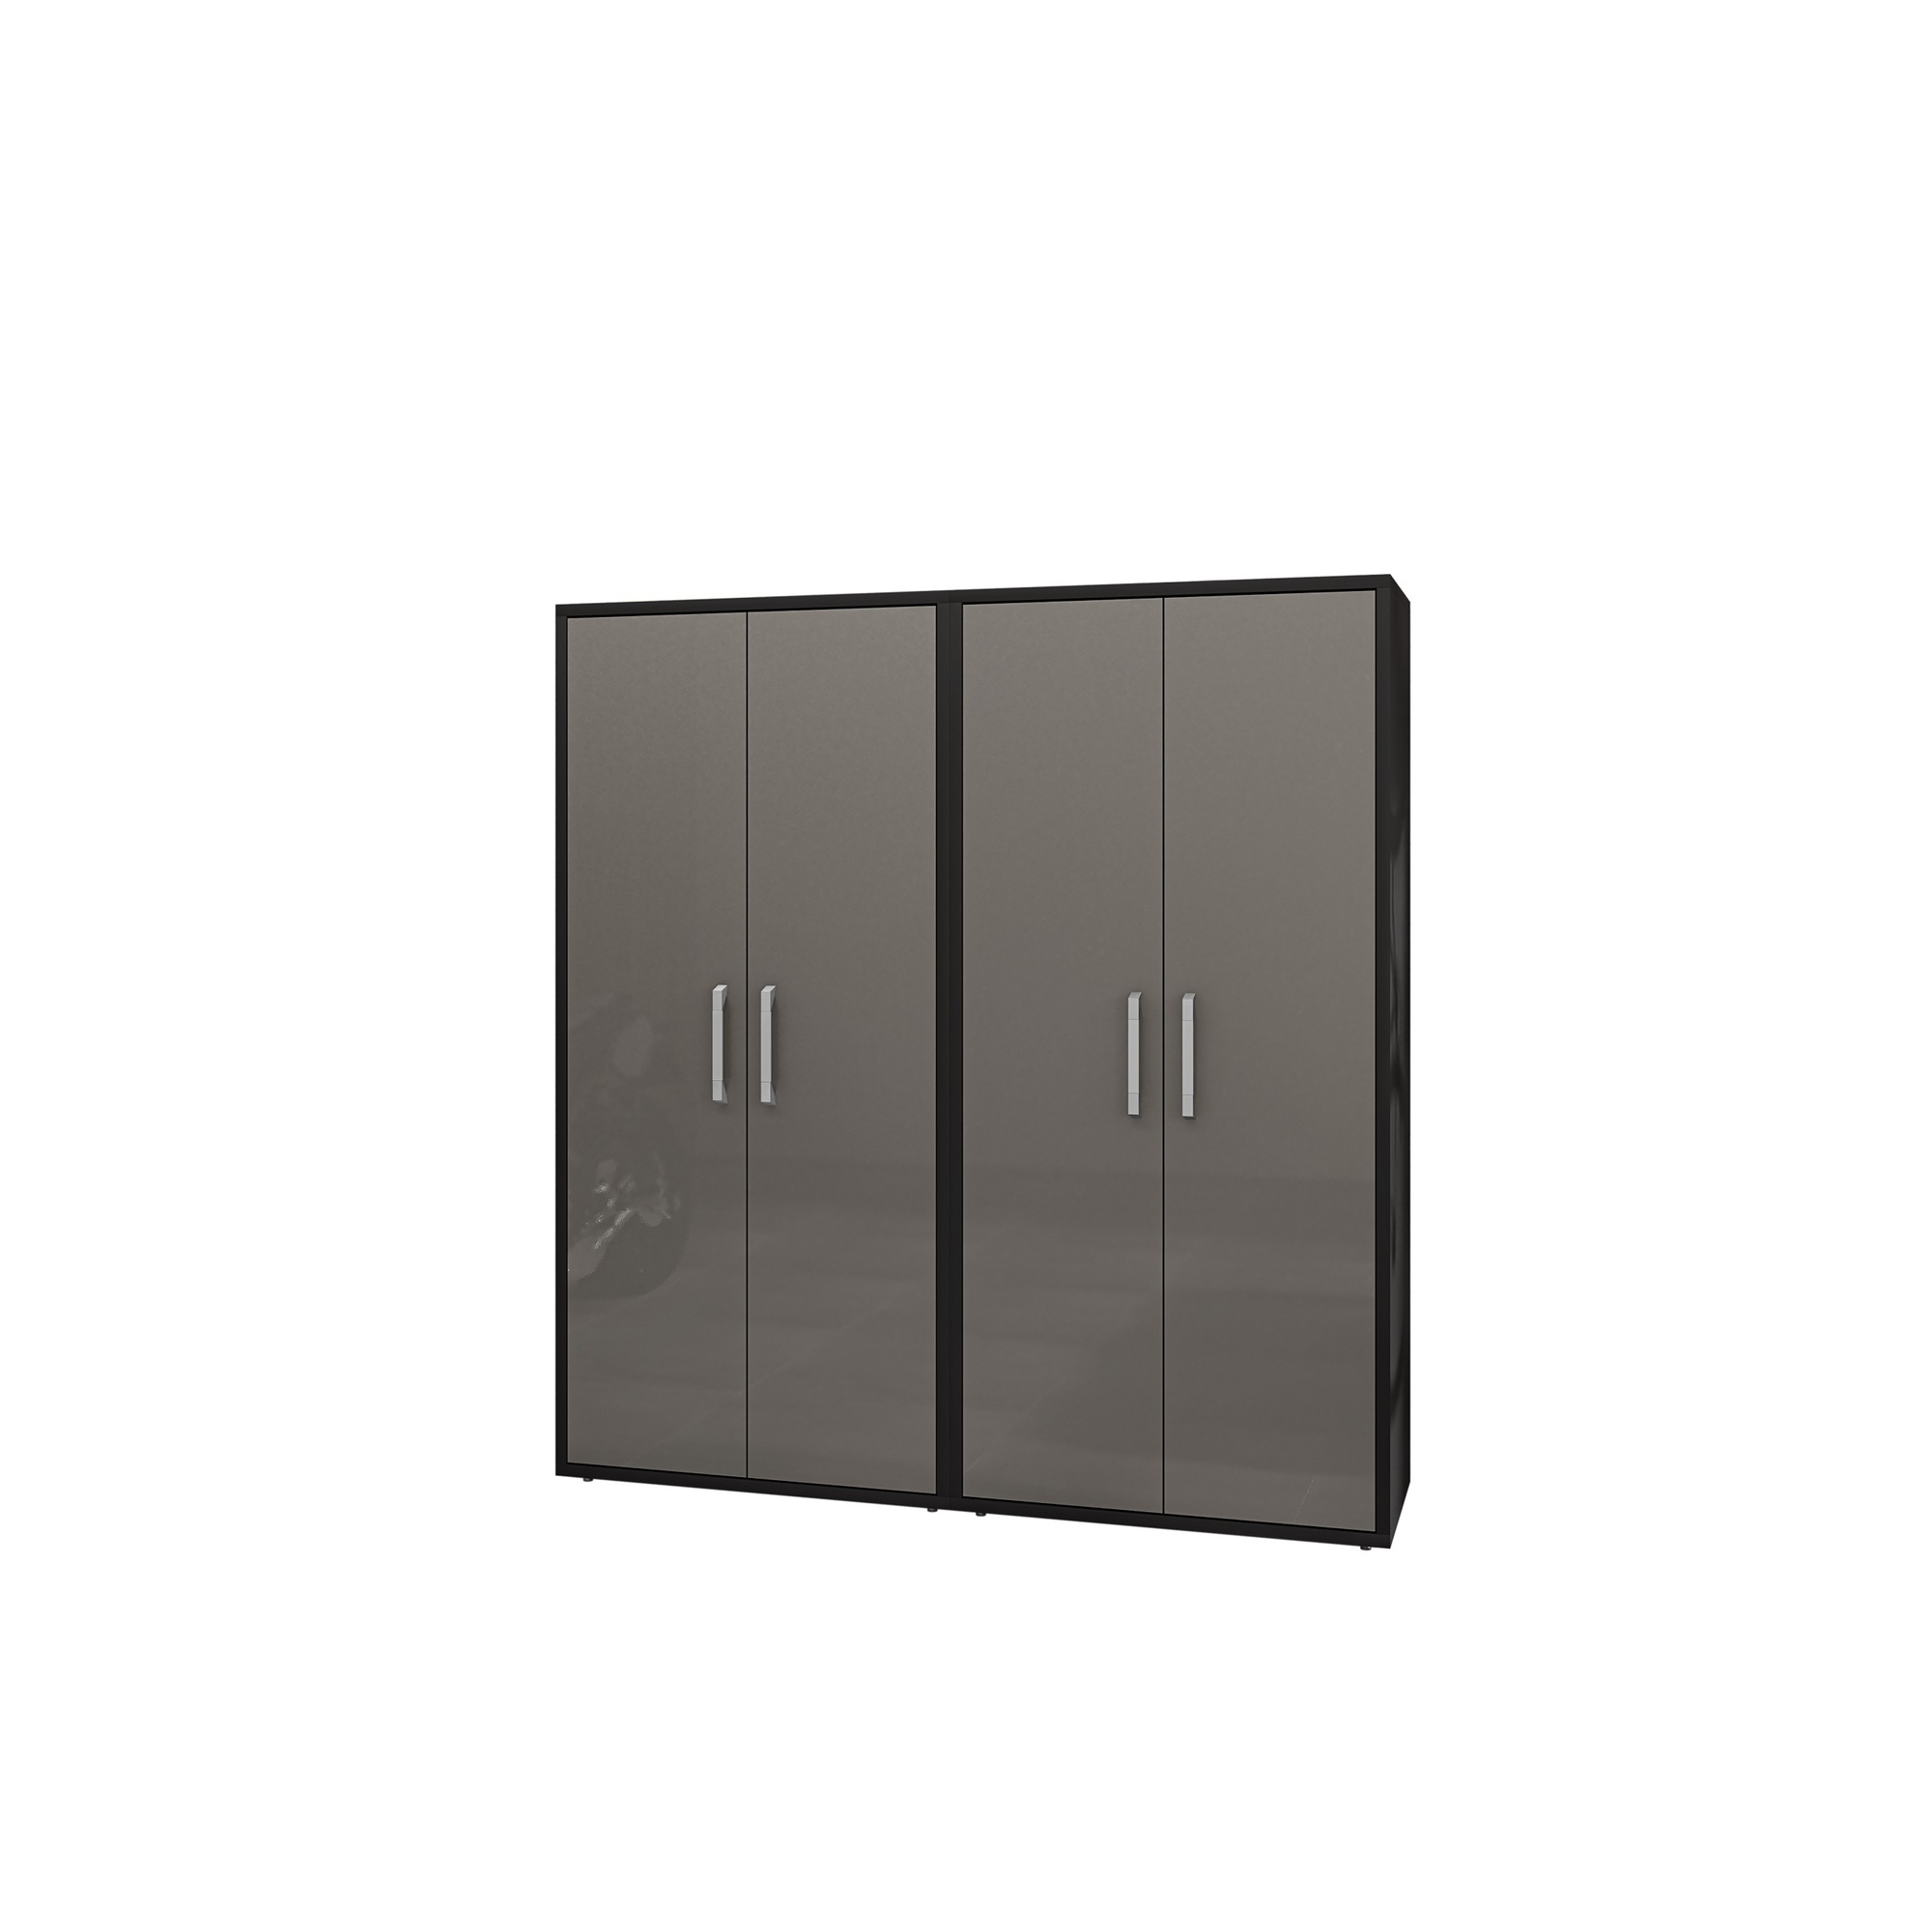 Manhattan Comfort, Eiffel Storage Cabinet in Black and Grey, Set of 2 Height 73.43 in, Width 70.86 in, Color Gray, Model 2-250BMC